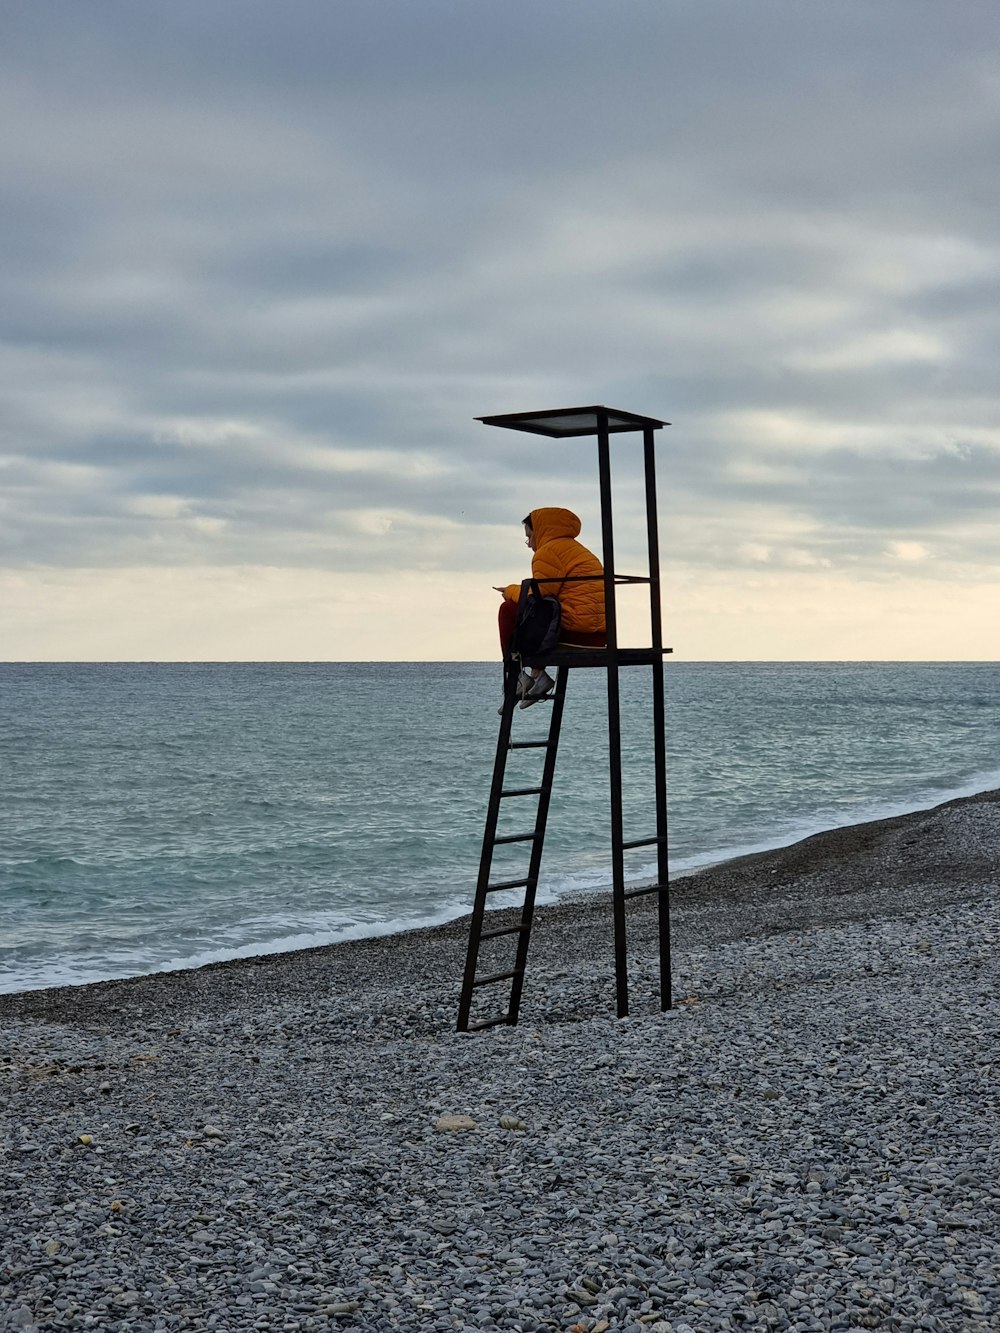 a person sitting on a chair on a beach